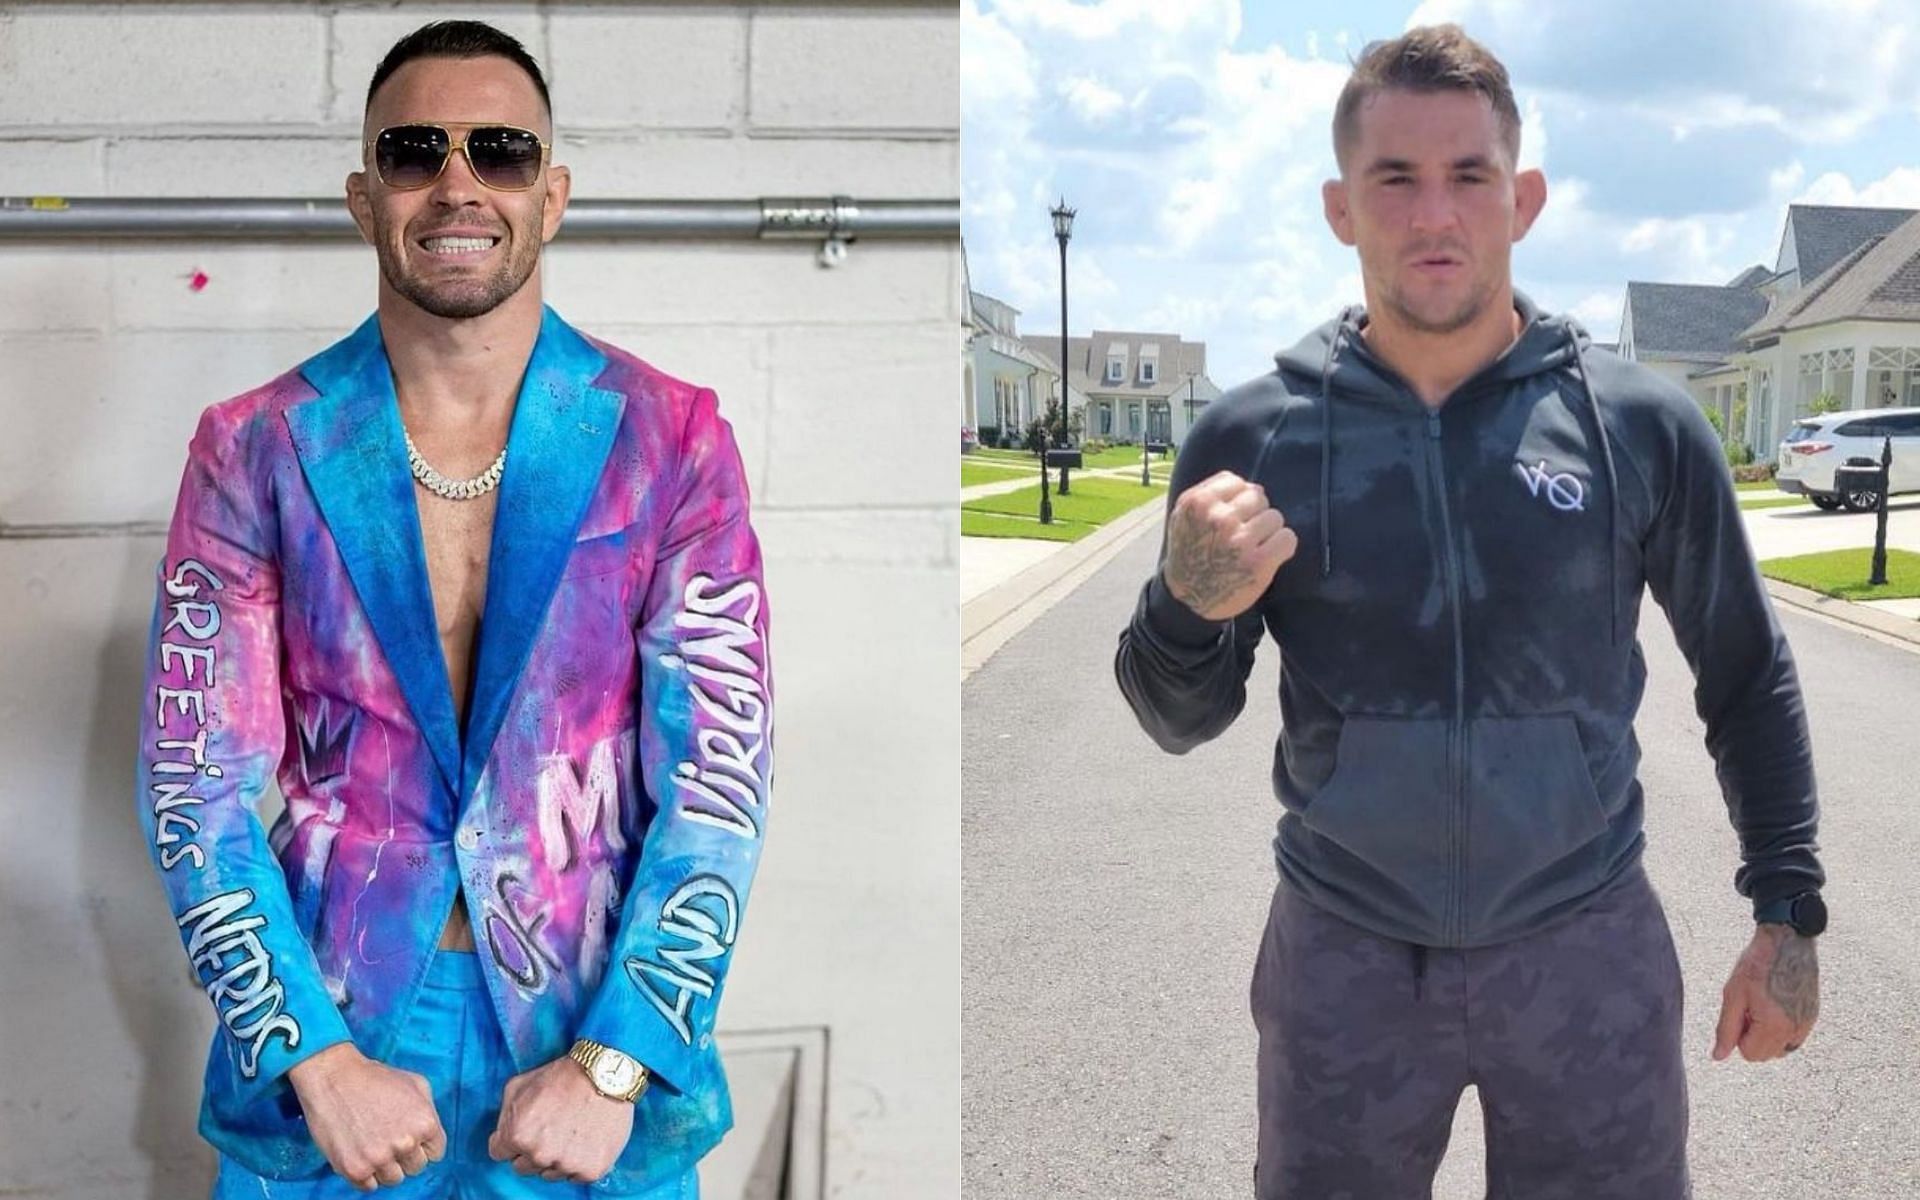 Colby Covington (left) and Dustin Poirier (right) [Image credits: @colbycovmma and @dustinpoirier on Instagram]